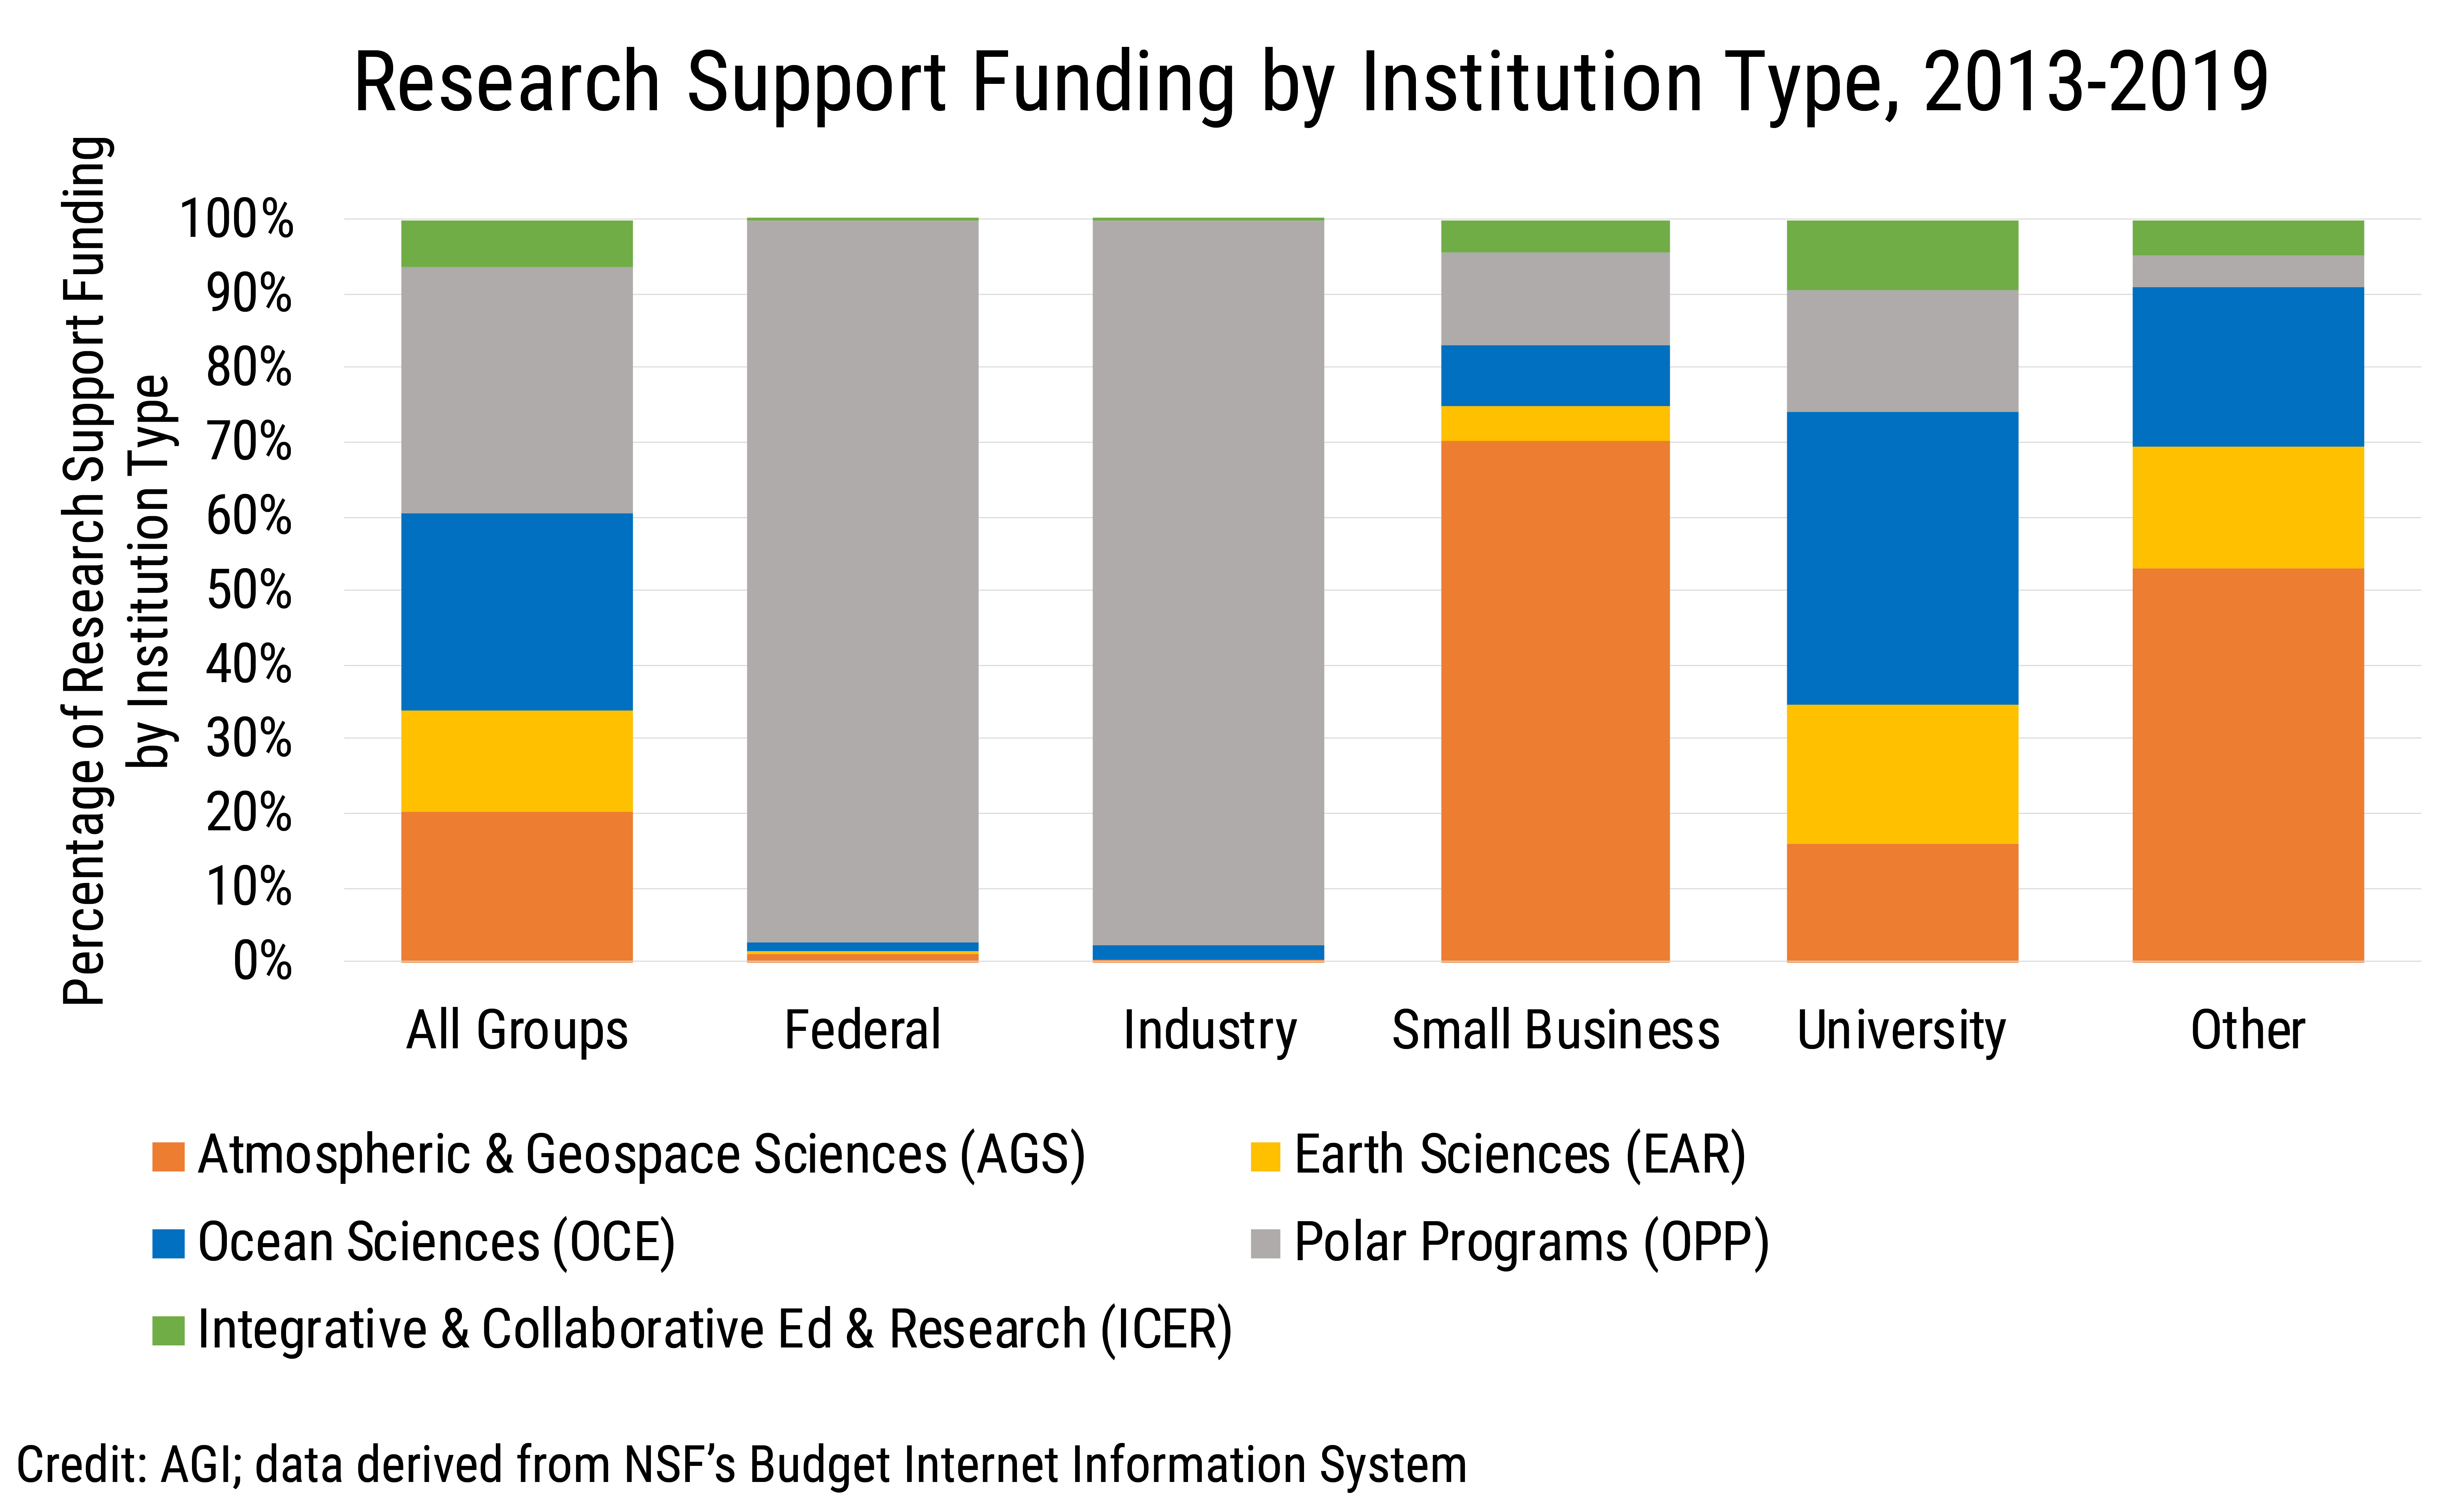 Data Brief 2020-001 chart 04: Research Support Funding by Institution Type, 2013-2019 (credit: AGI; data derived from NSF BIIS)